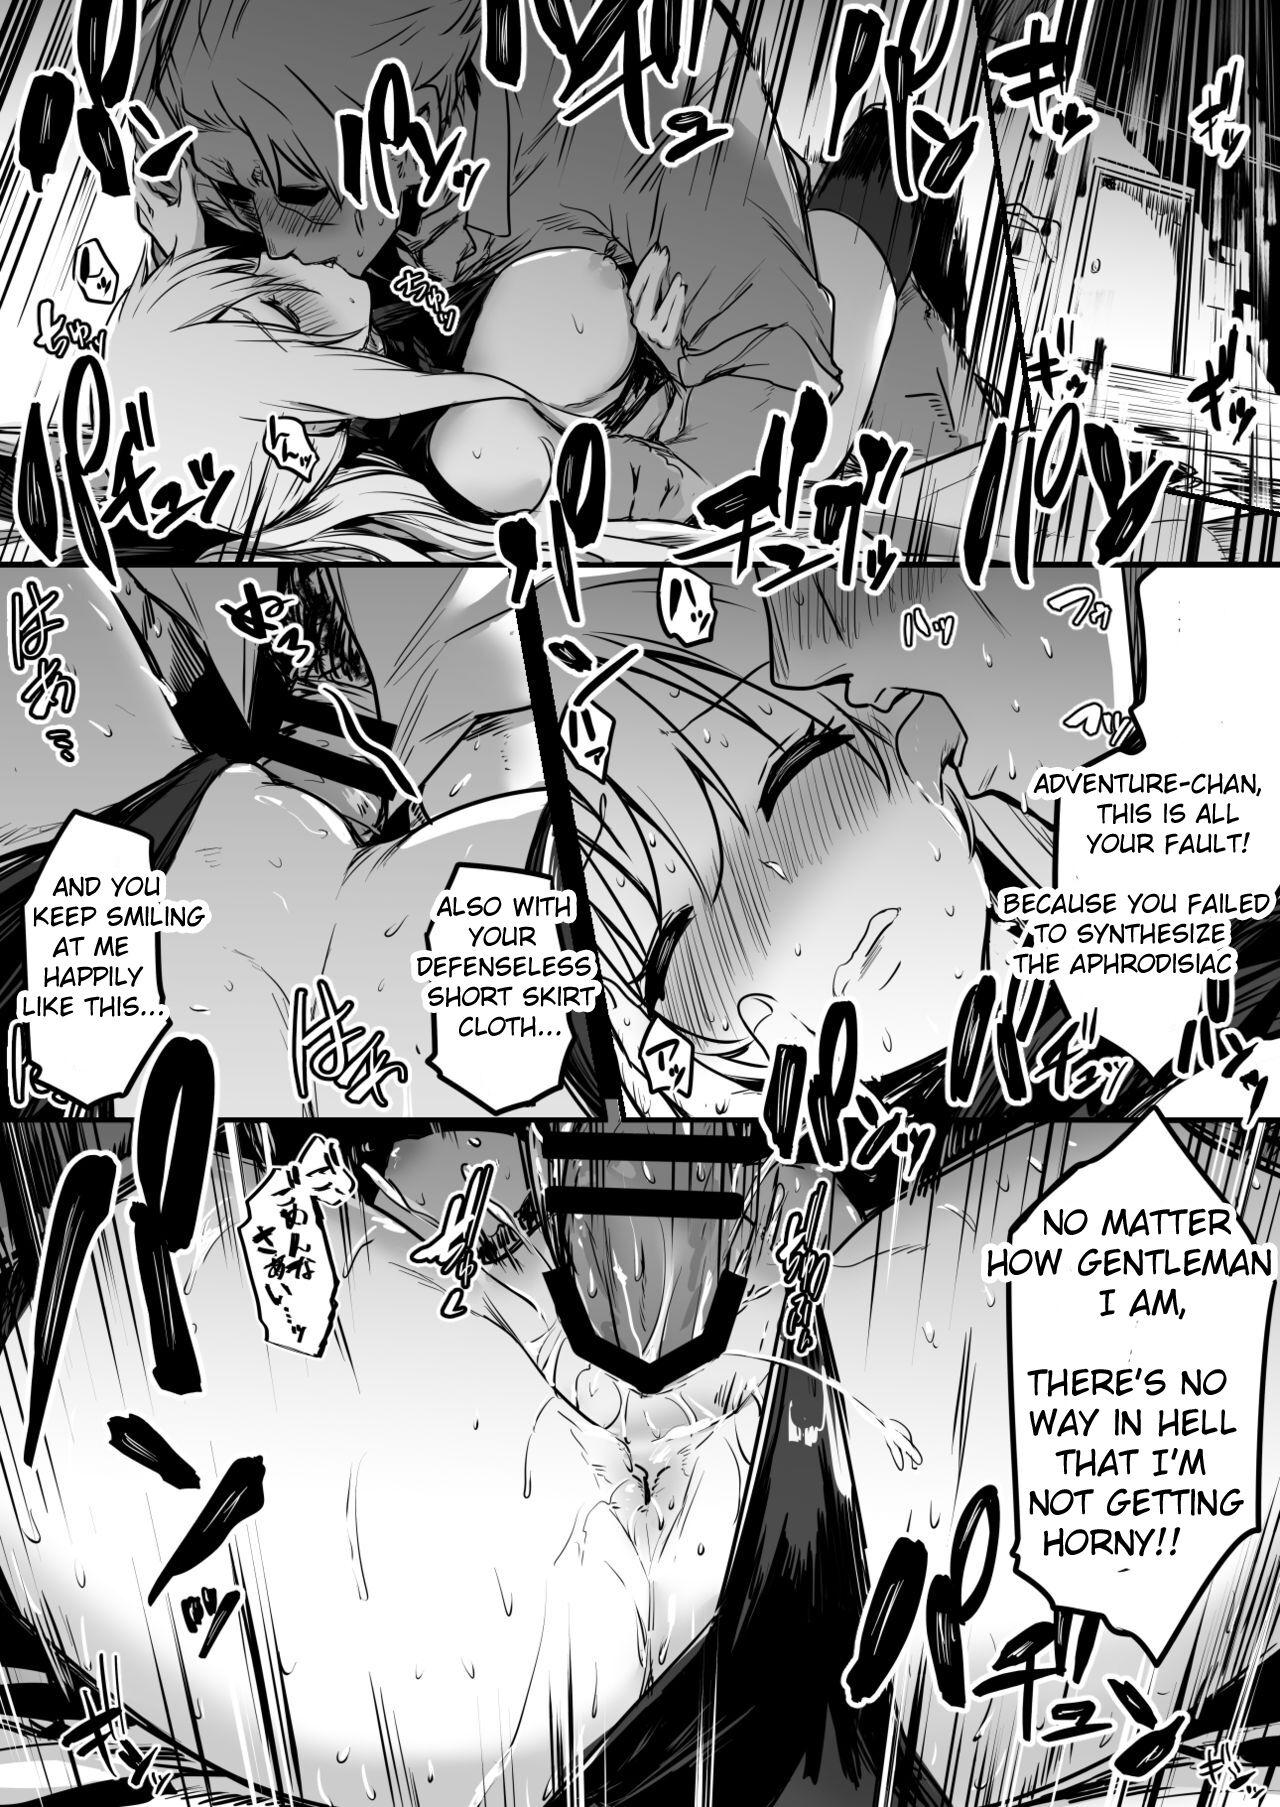 Hd Porn Adventure-chan who got heated up by an aphrodisiac plant and got raped by the Tool Shop master for 3 days - Original Menage - Page 3